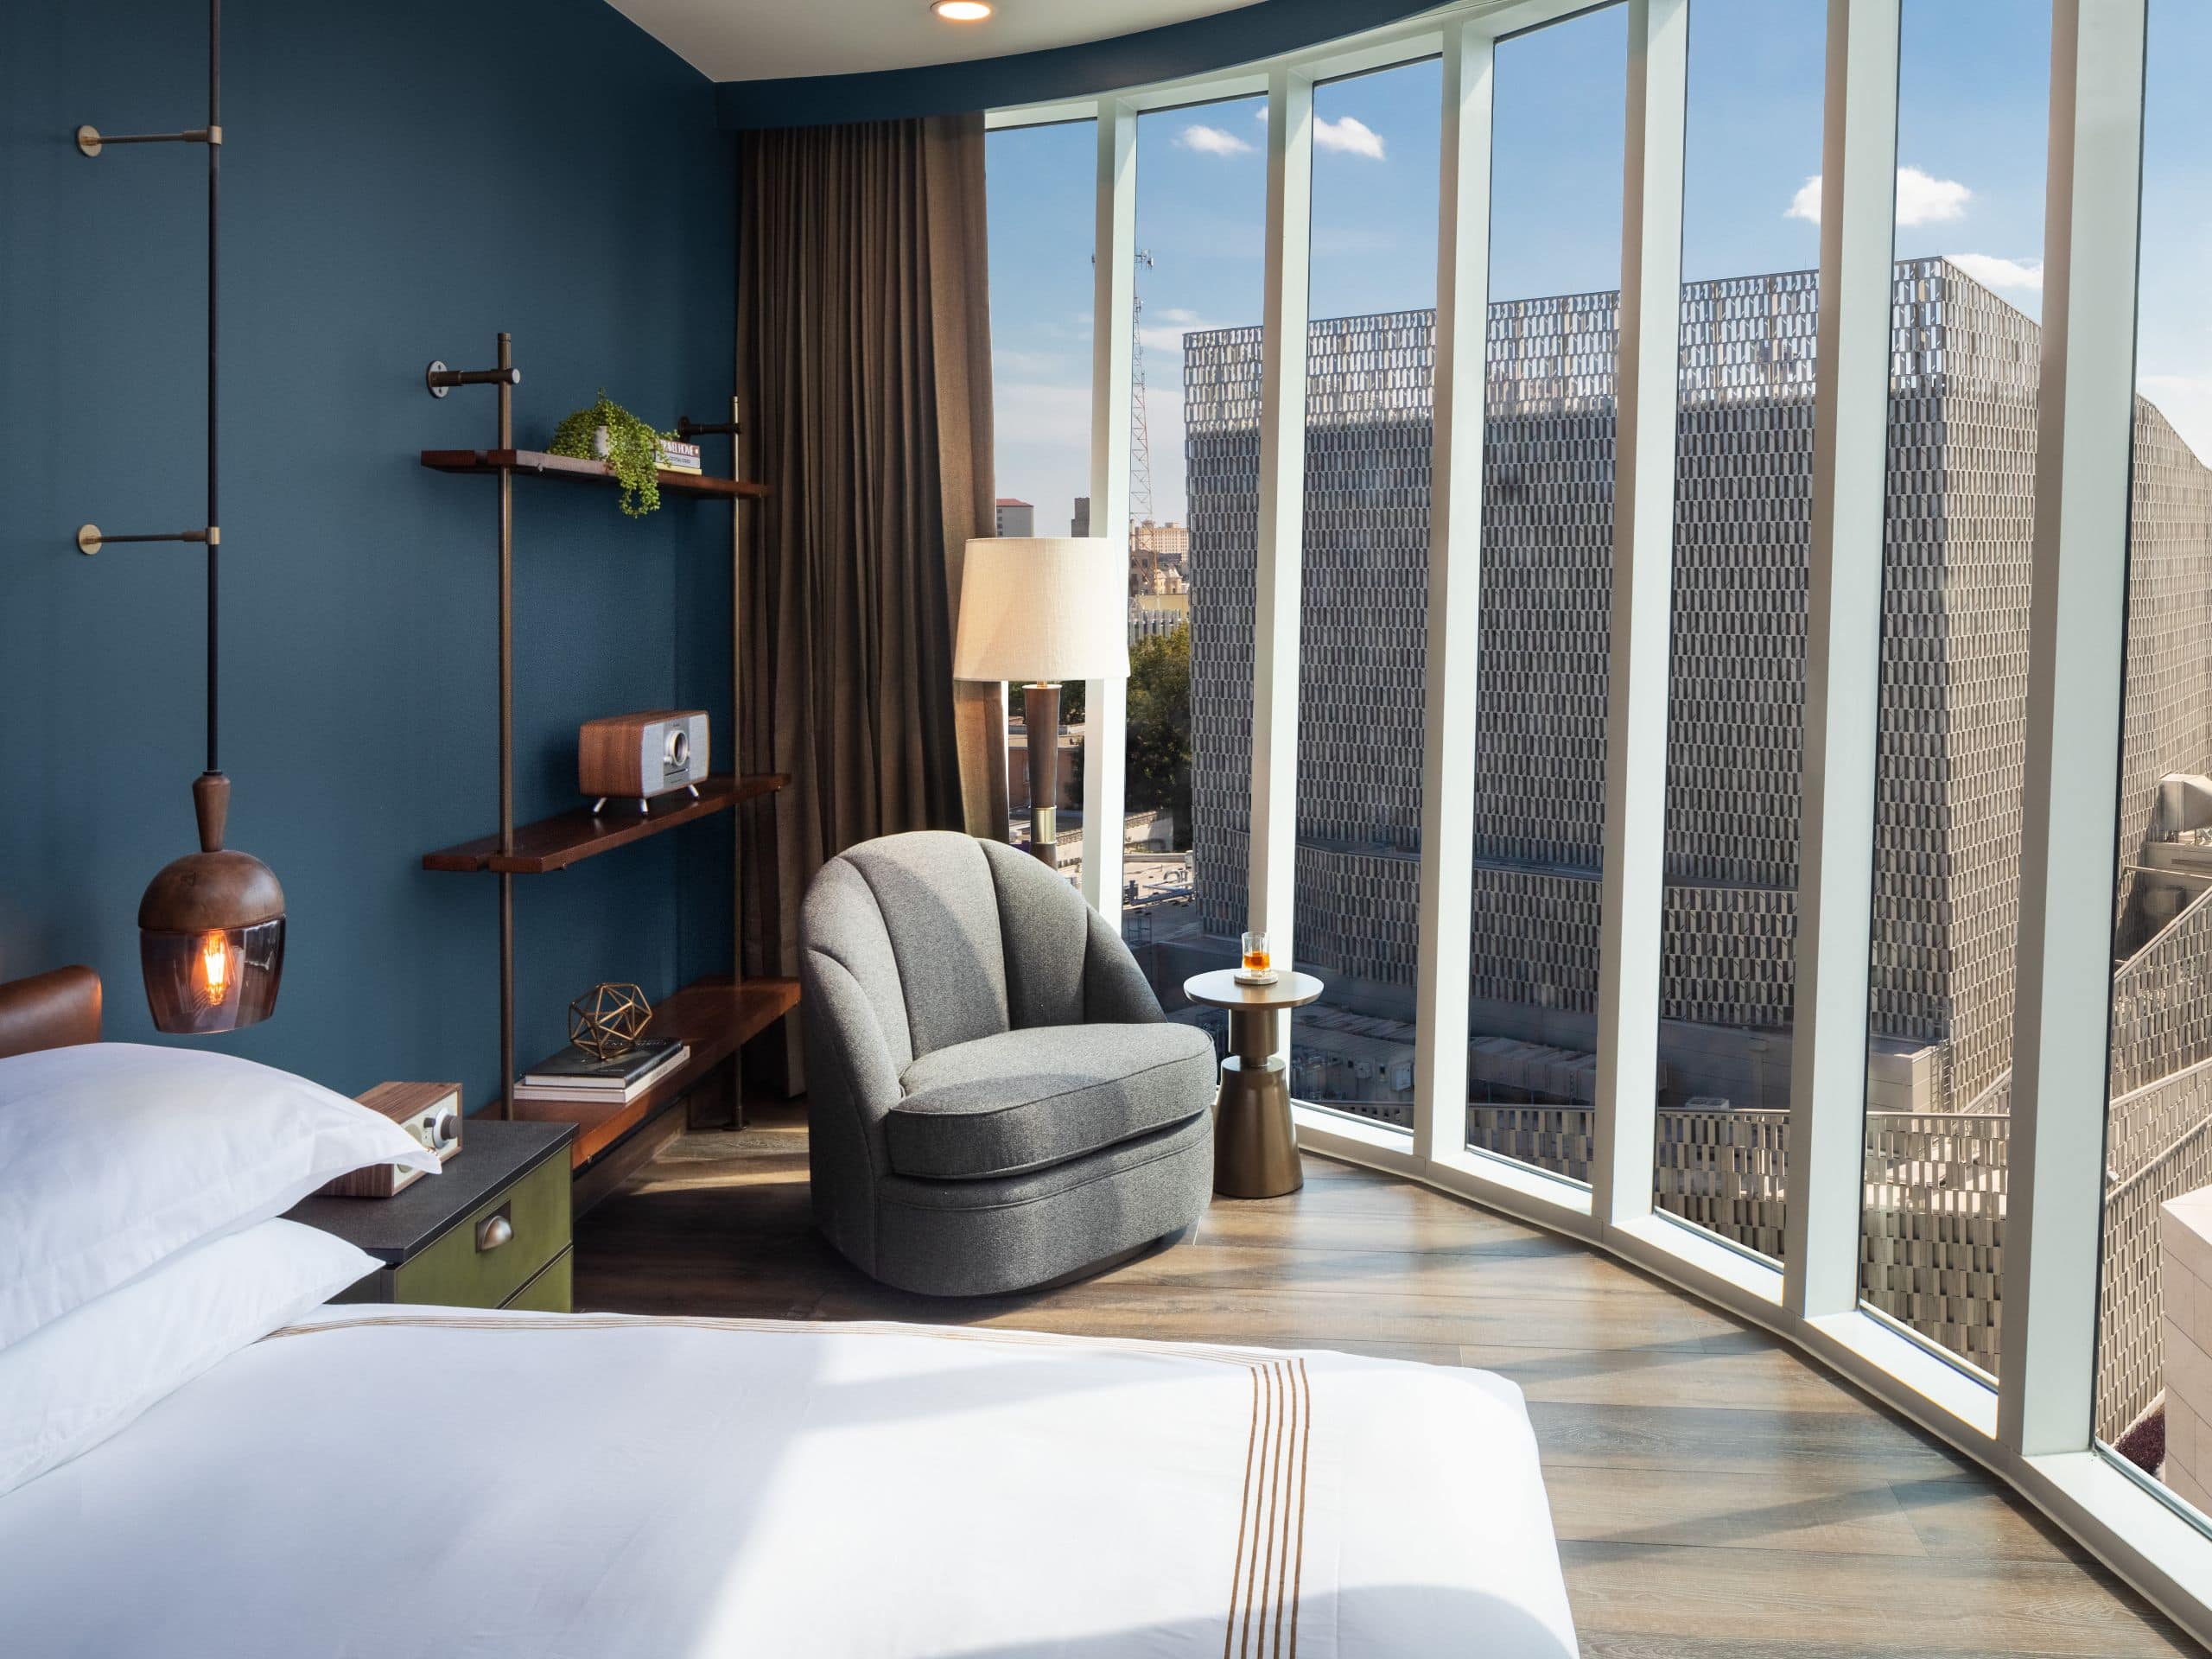 Riverwalk Suite with One King Bed and floor-to-ceiling windows